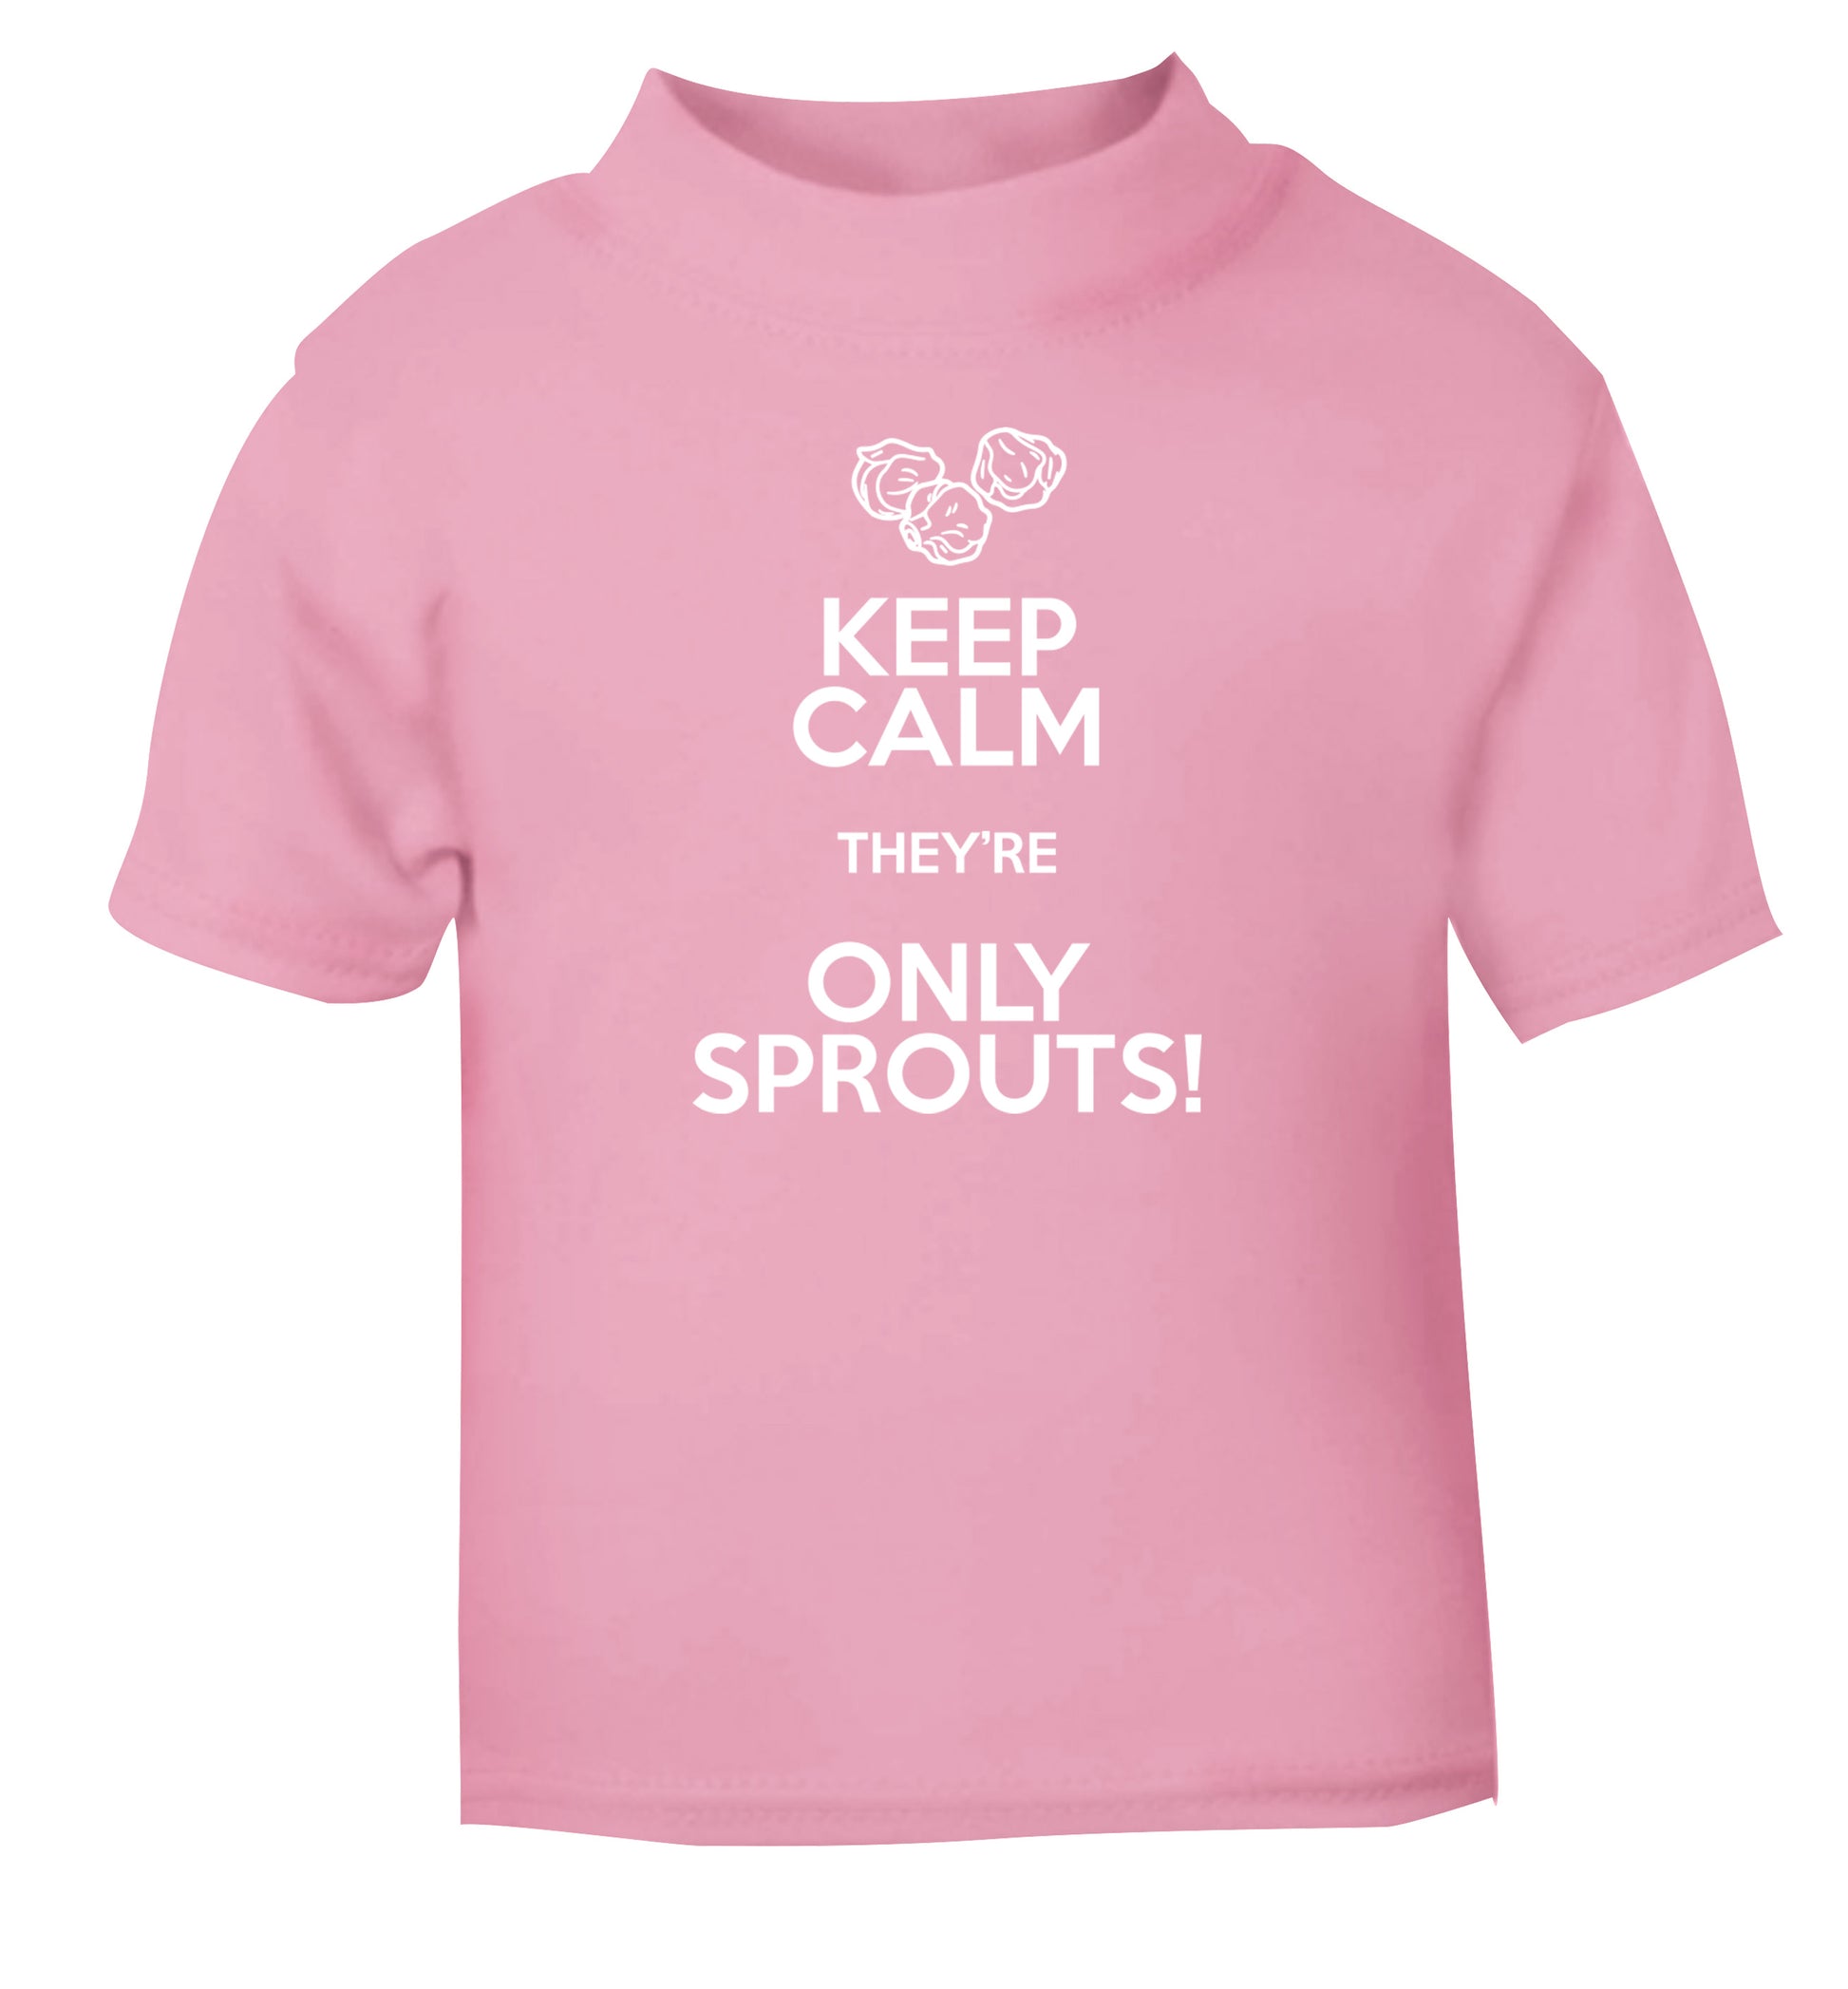 Keep calm they're only sprouts light pink Baby Toddler Tshirt 2 Years